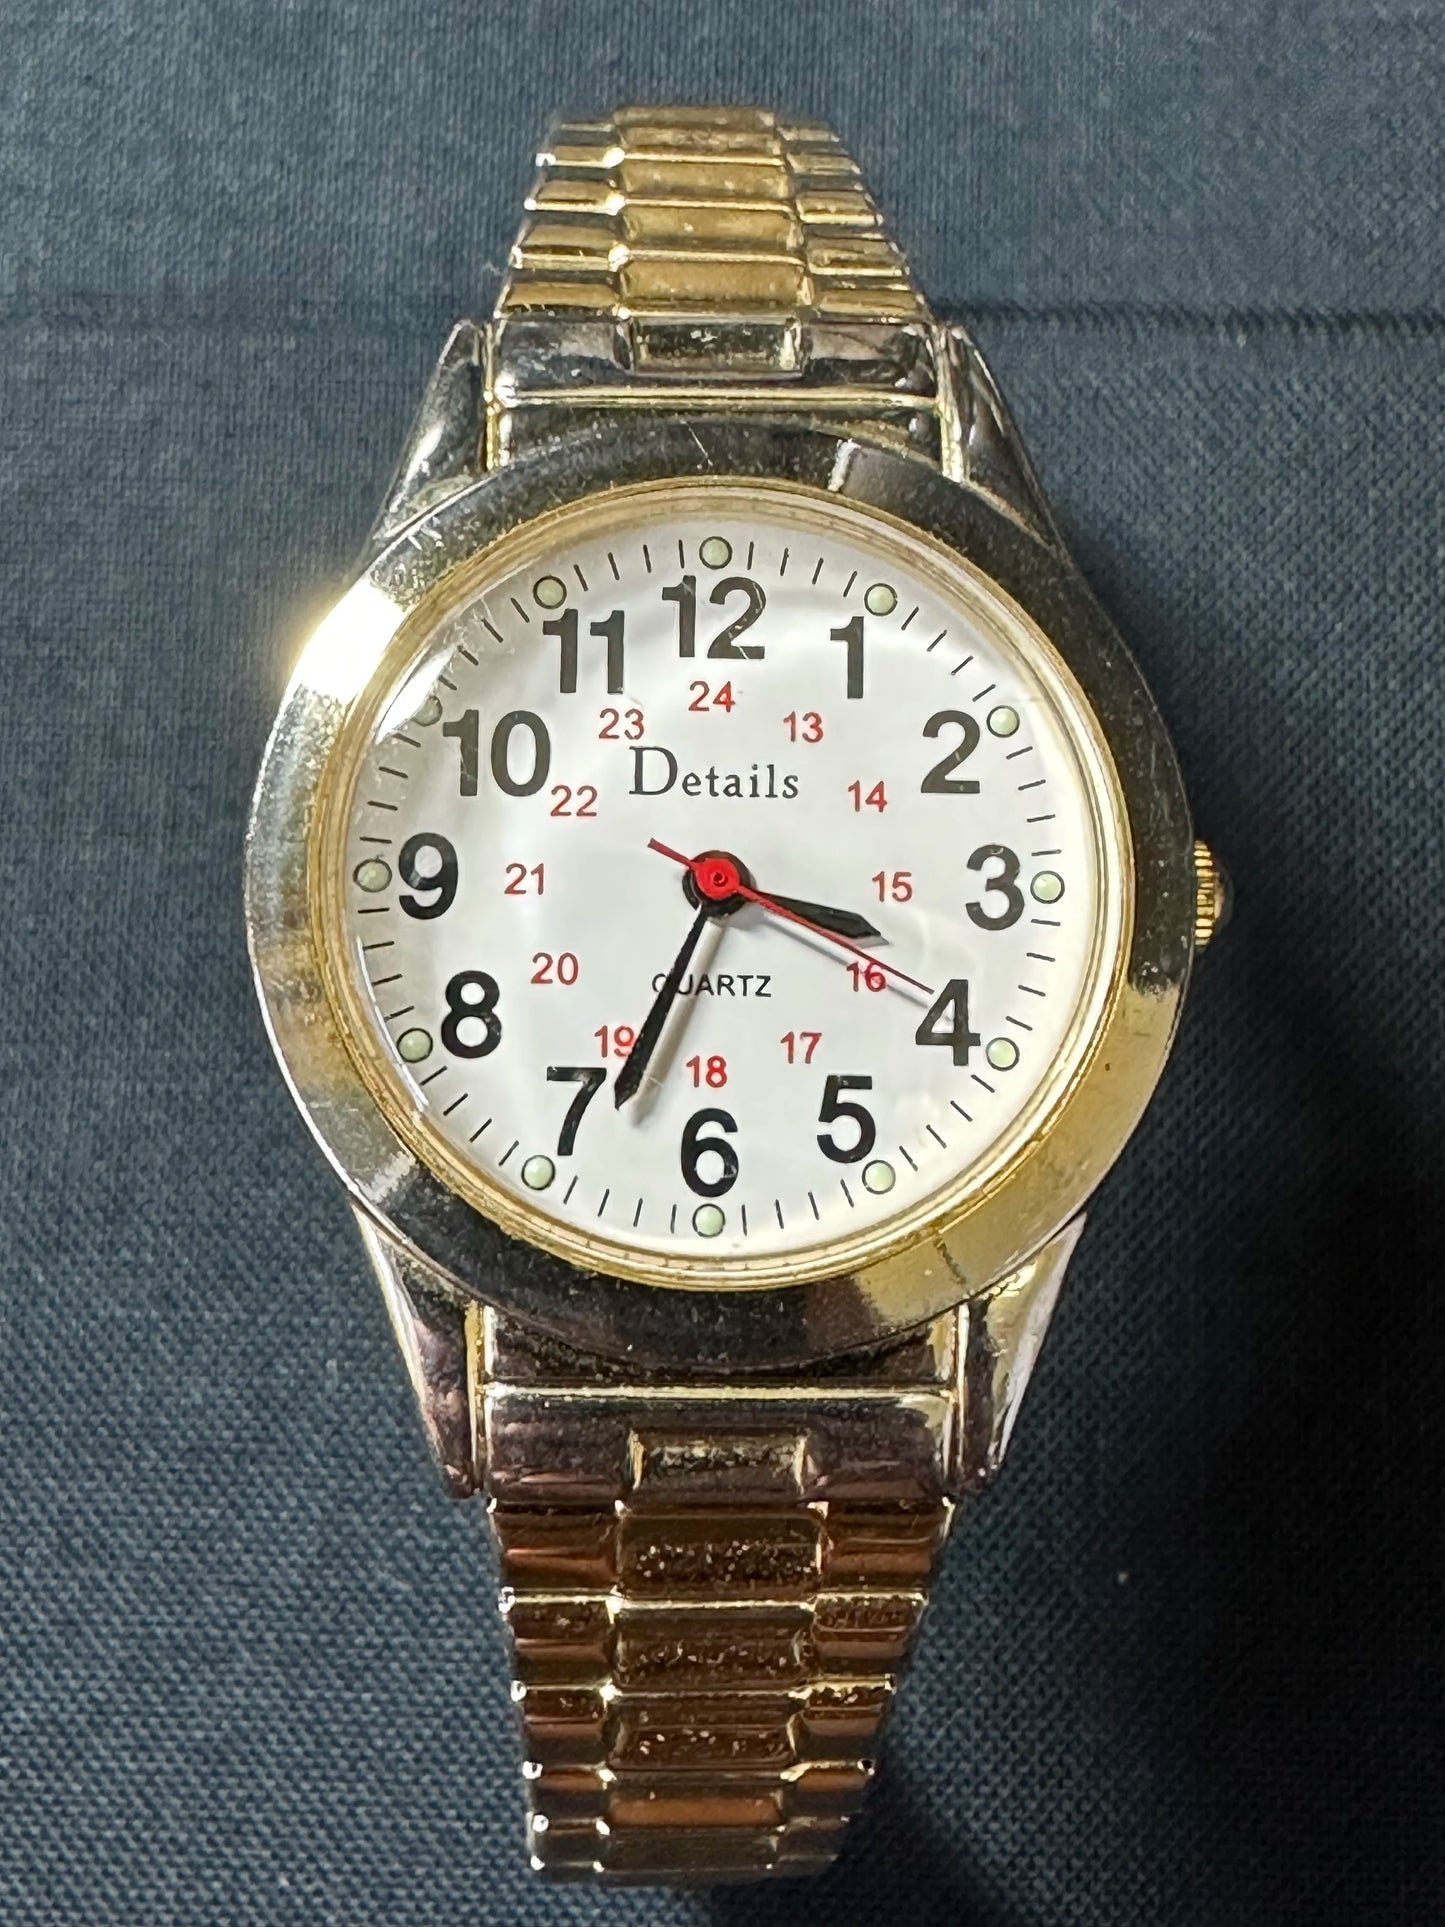 Details Ladies Watch - Gold Tone - White Dial